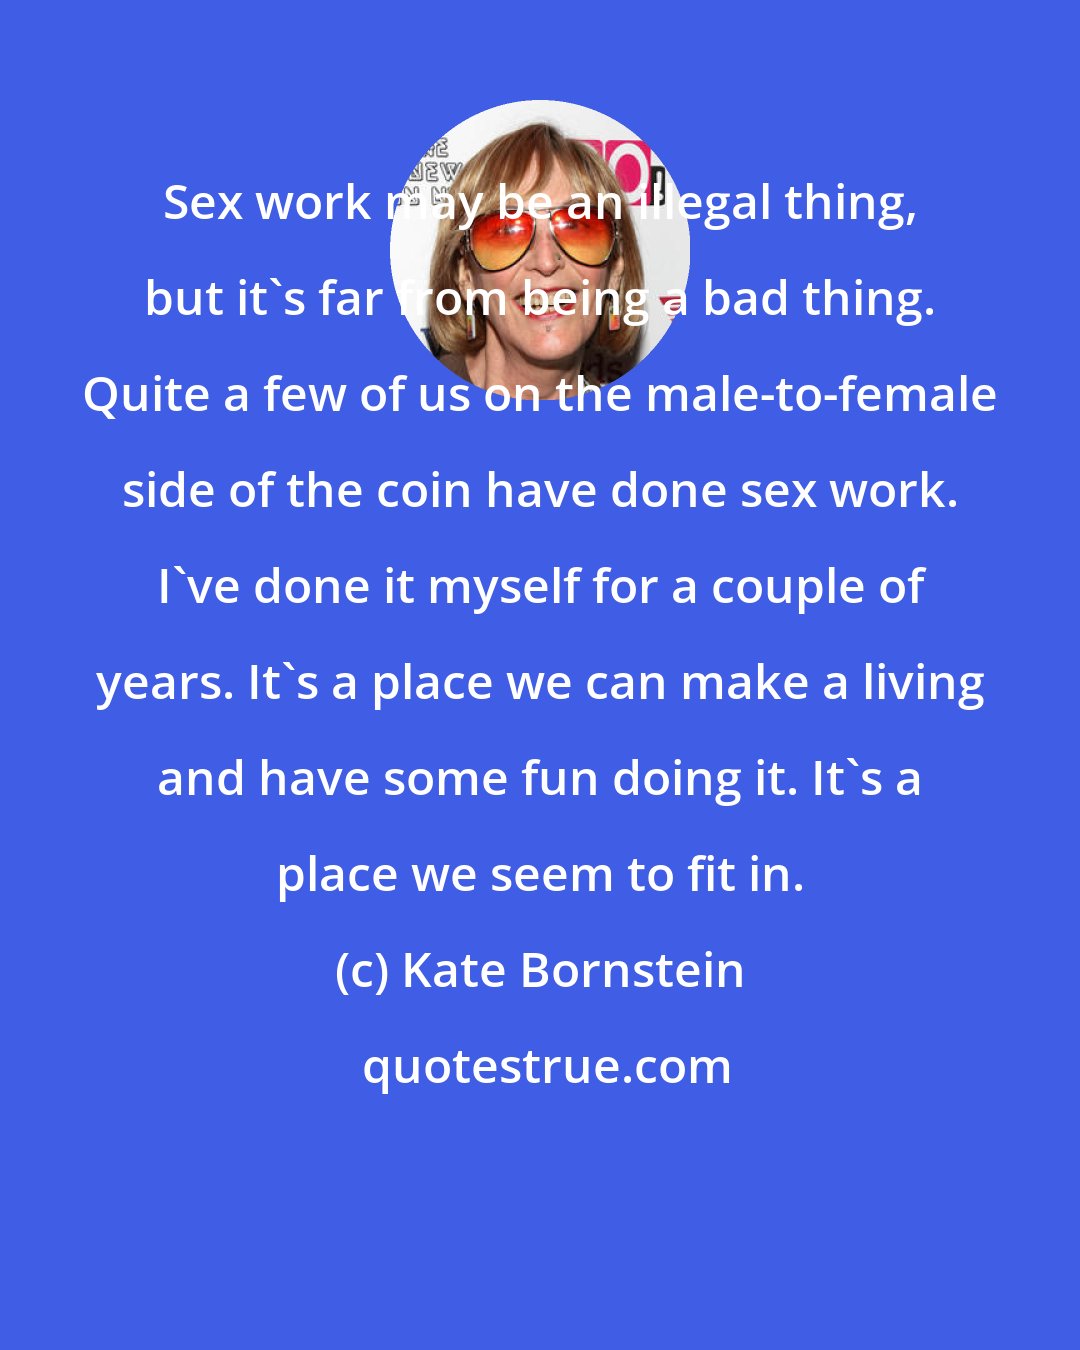 Kate Bornstein: Sex work may be an illegal thing, but it's far from being a bad thing. Quite a few of us on the male-to-female side of the coin have done sex work. I've done it myself for a couple of years. It's a place we can make a living and have some fun doing it. It's a place we seem to fit in.